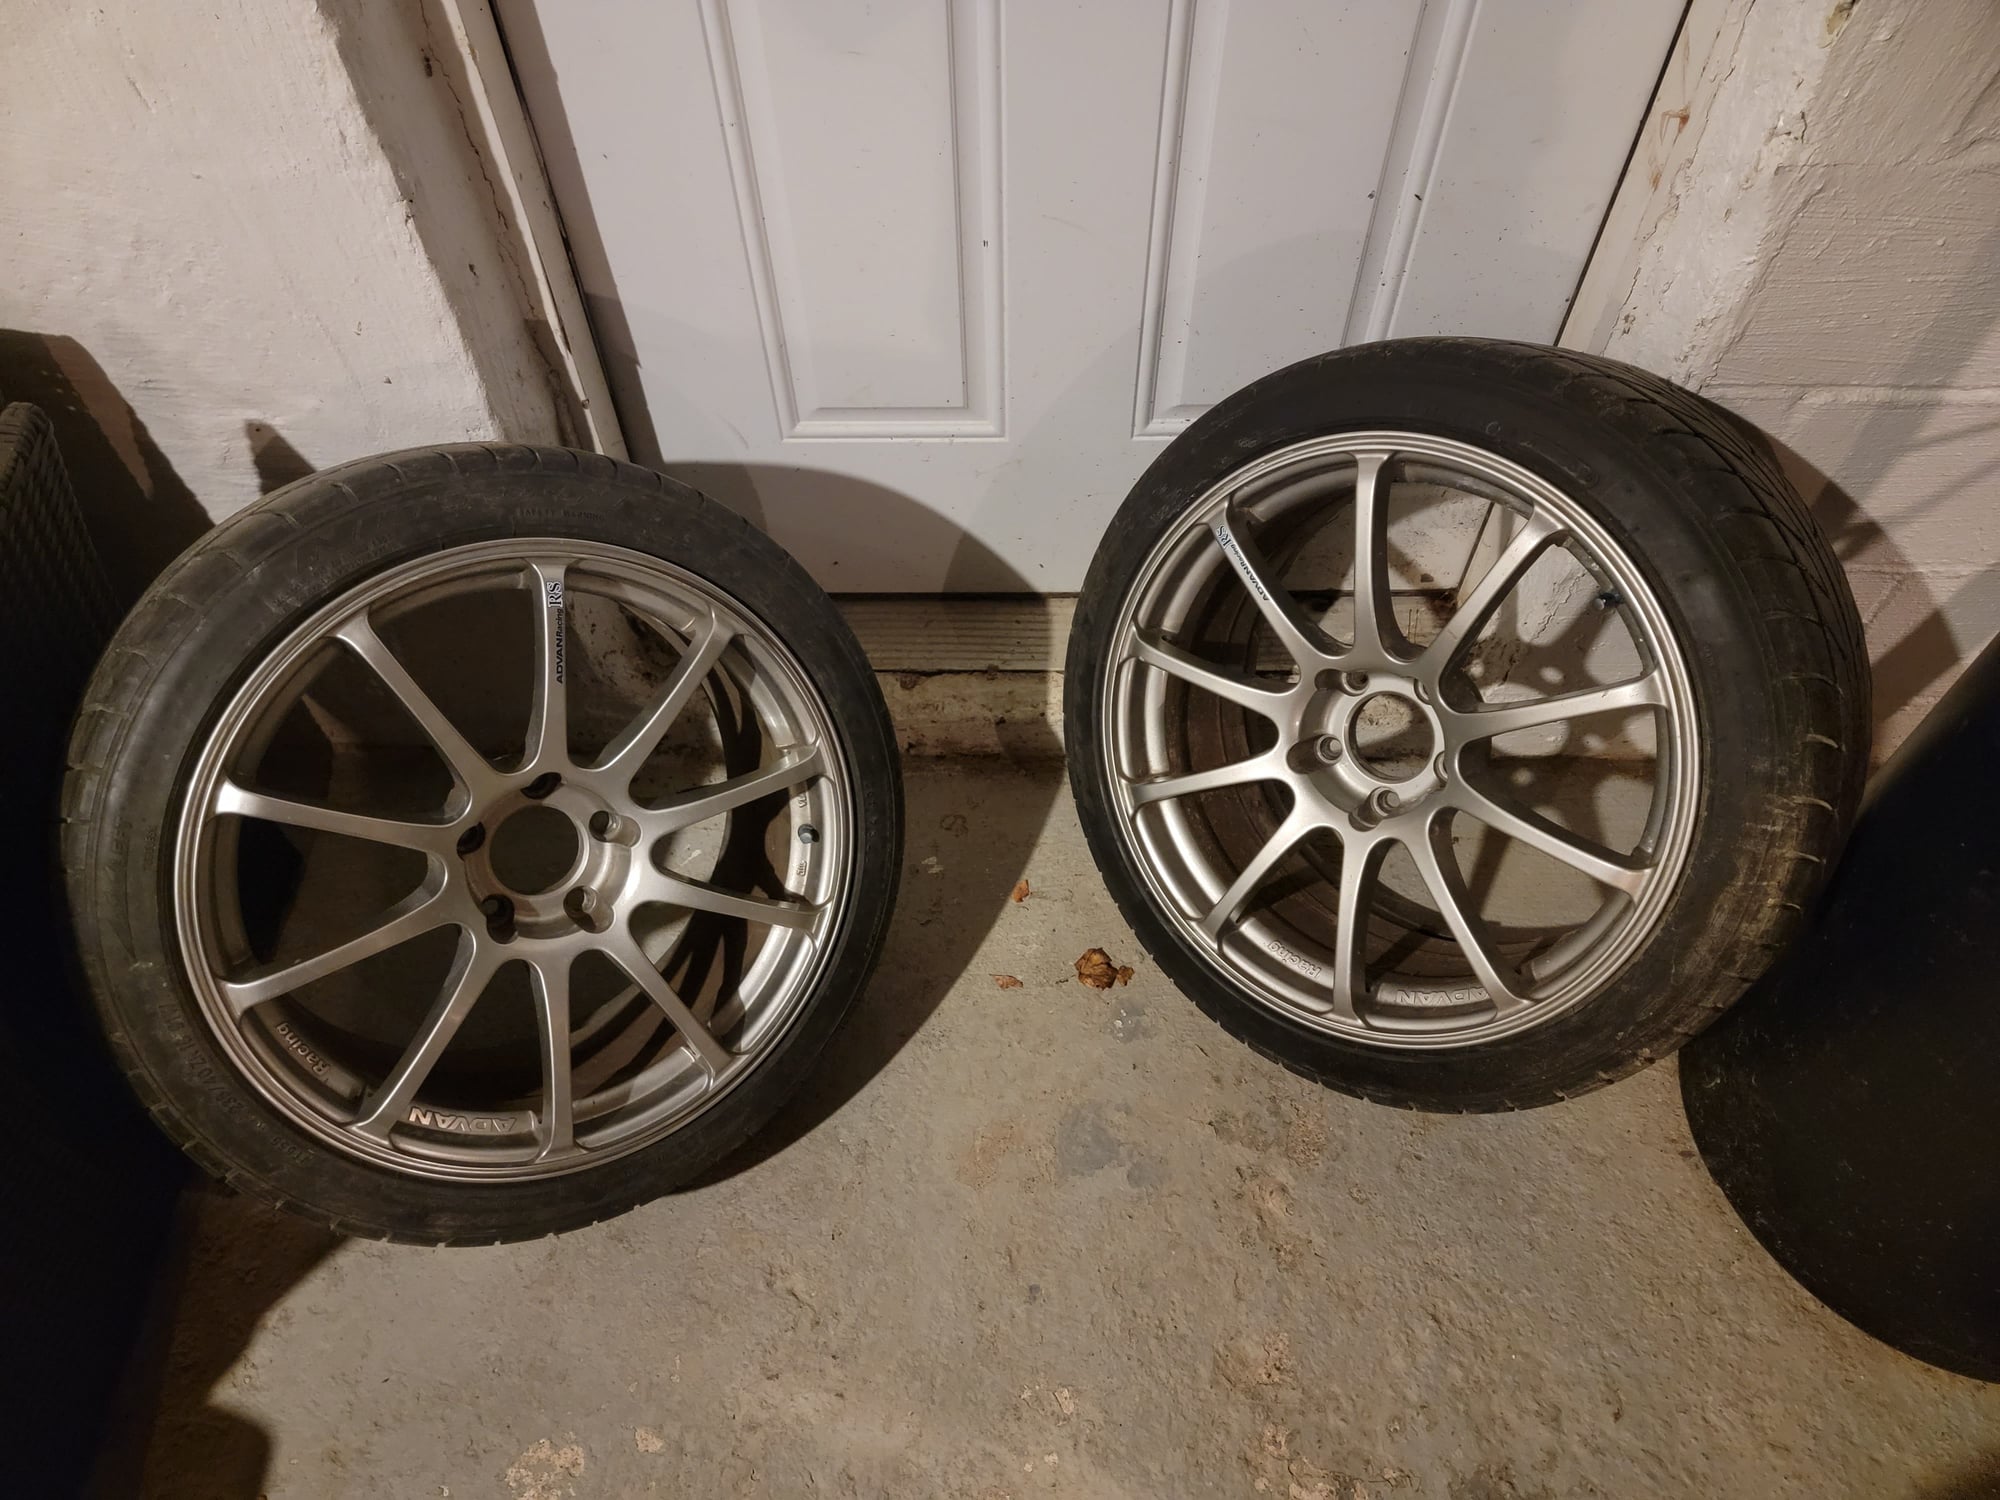 Wheels and Tires/Axles - Advan rs - Used - 0  All Models - West Harrison, IN 47060, United States